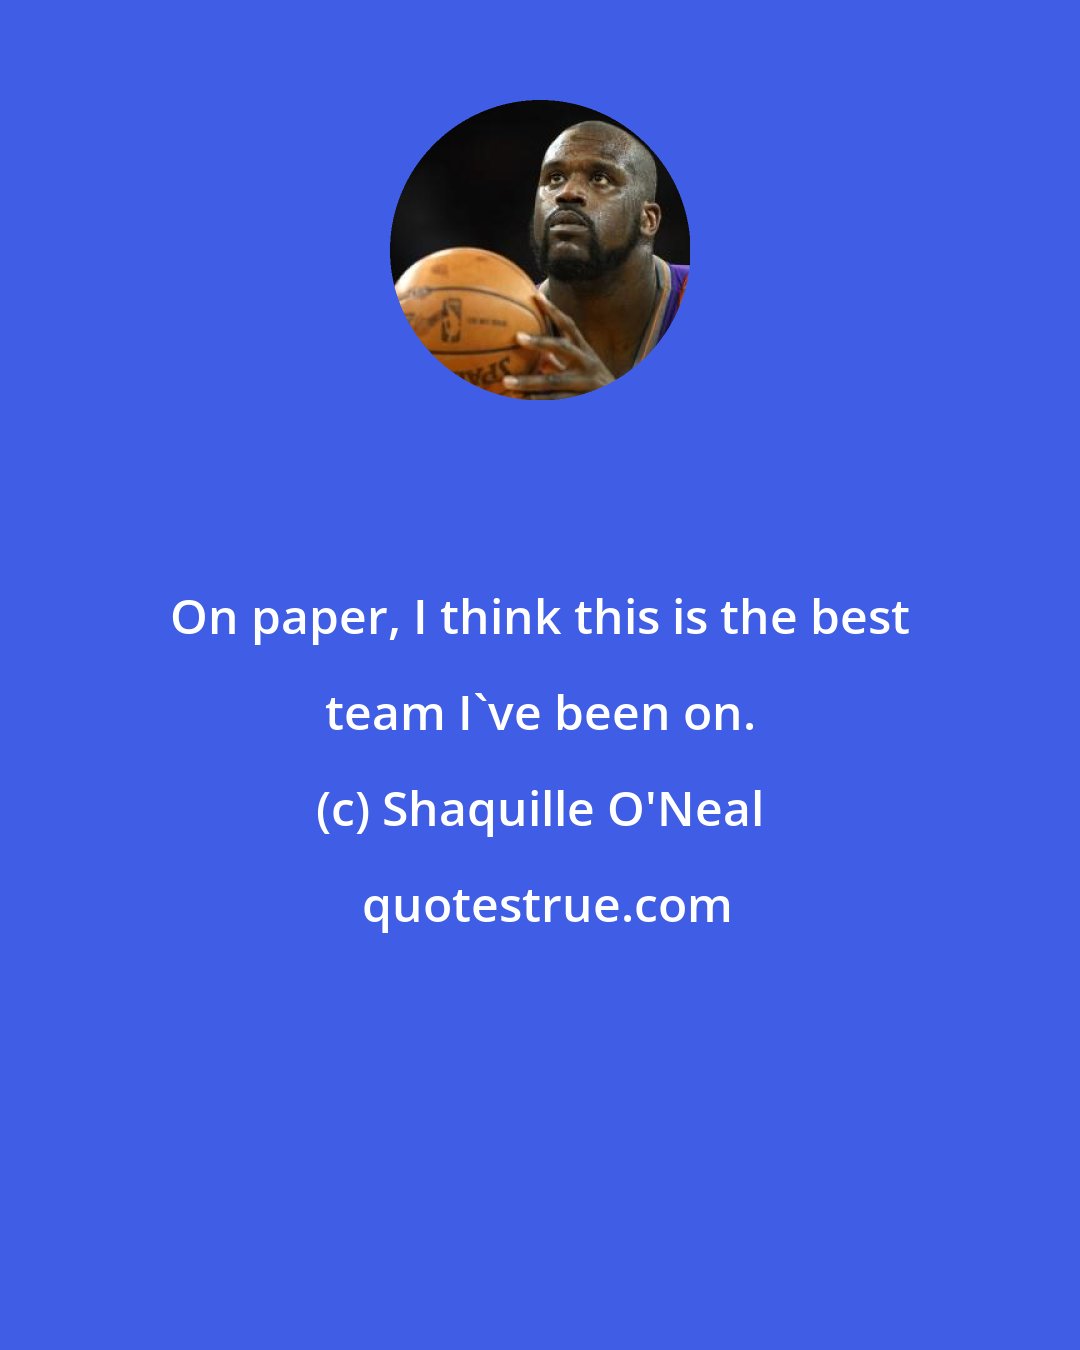 Shaquille O'Neal: On paper, I think this is the best team I've been on.